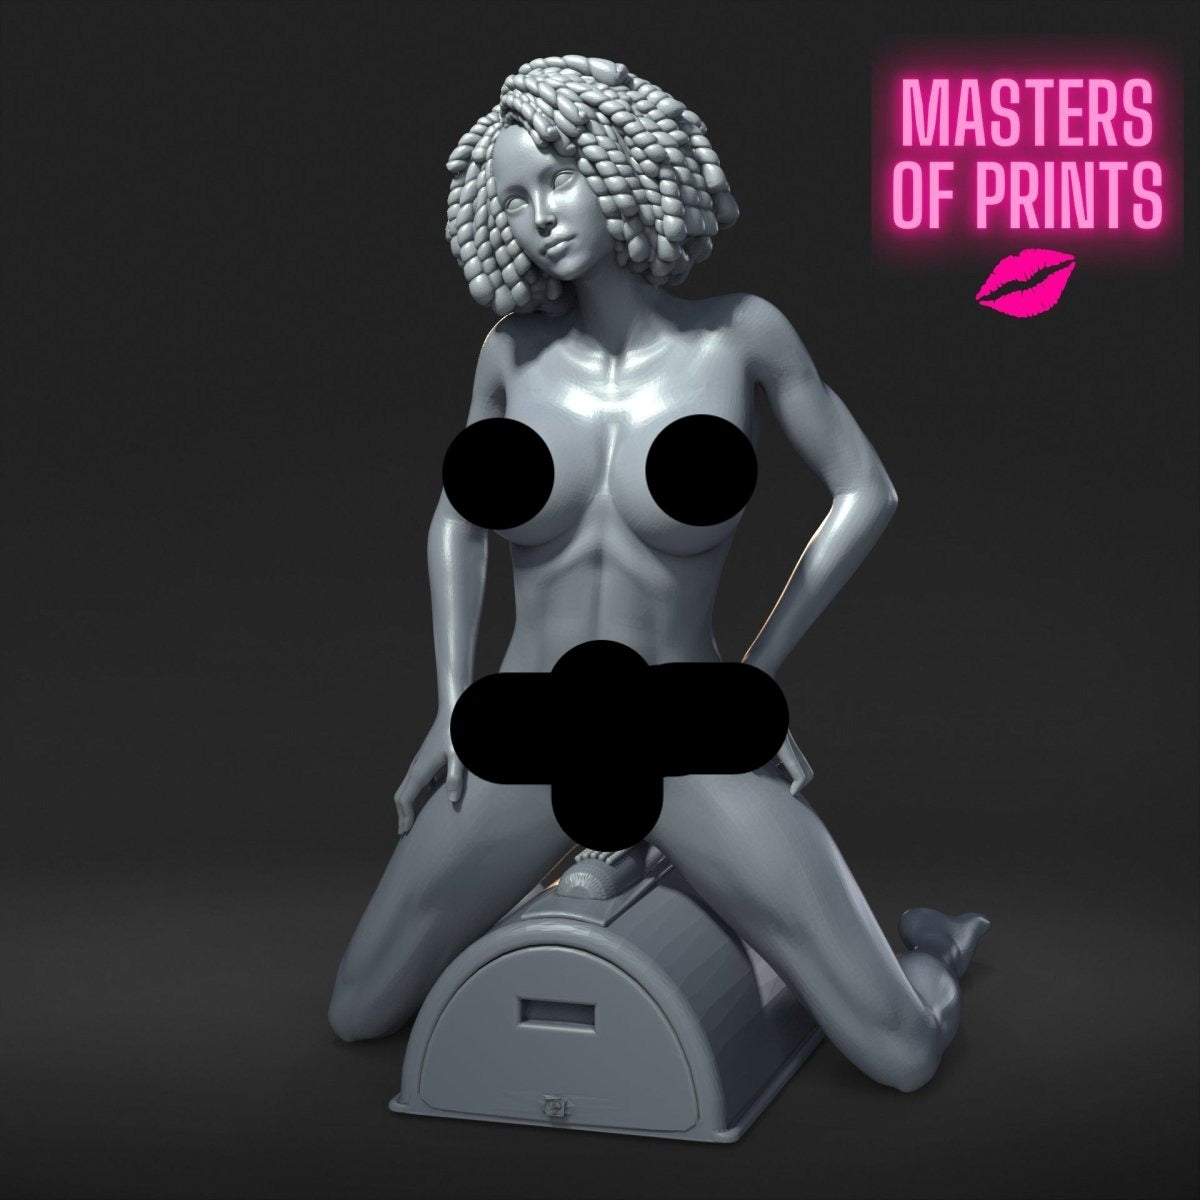 Single Saddle 1 Mature 3d Printed miniature FanArt by Masters Of Prints Collectables Statues & Figurines